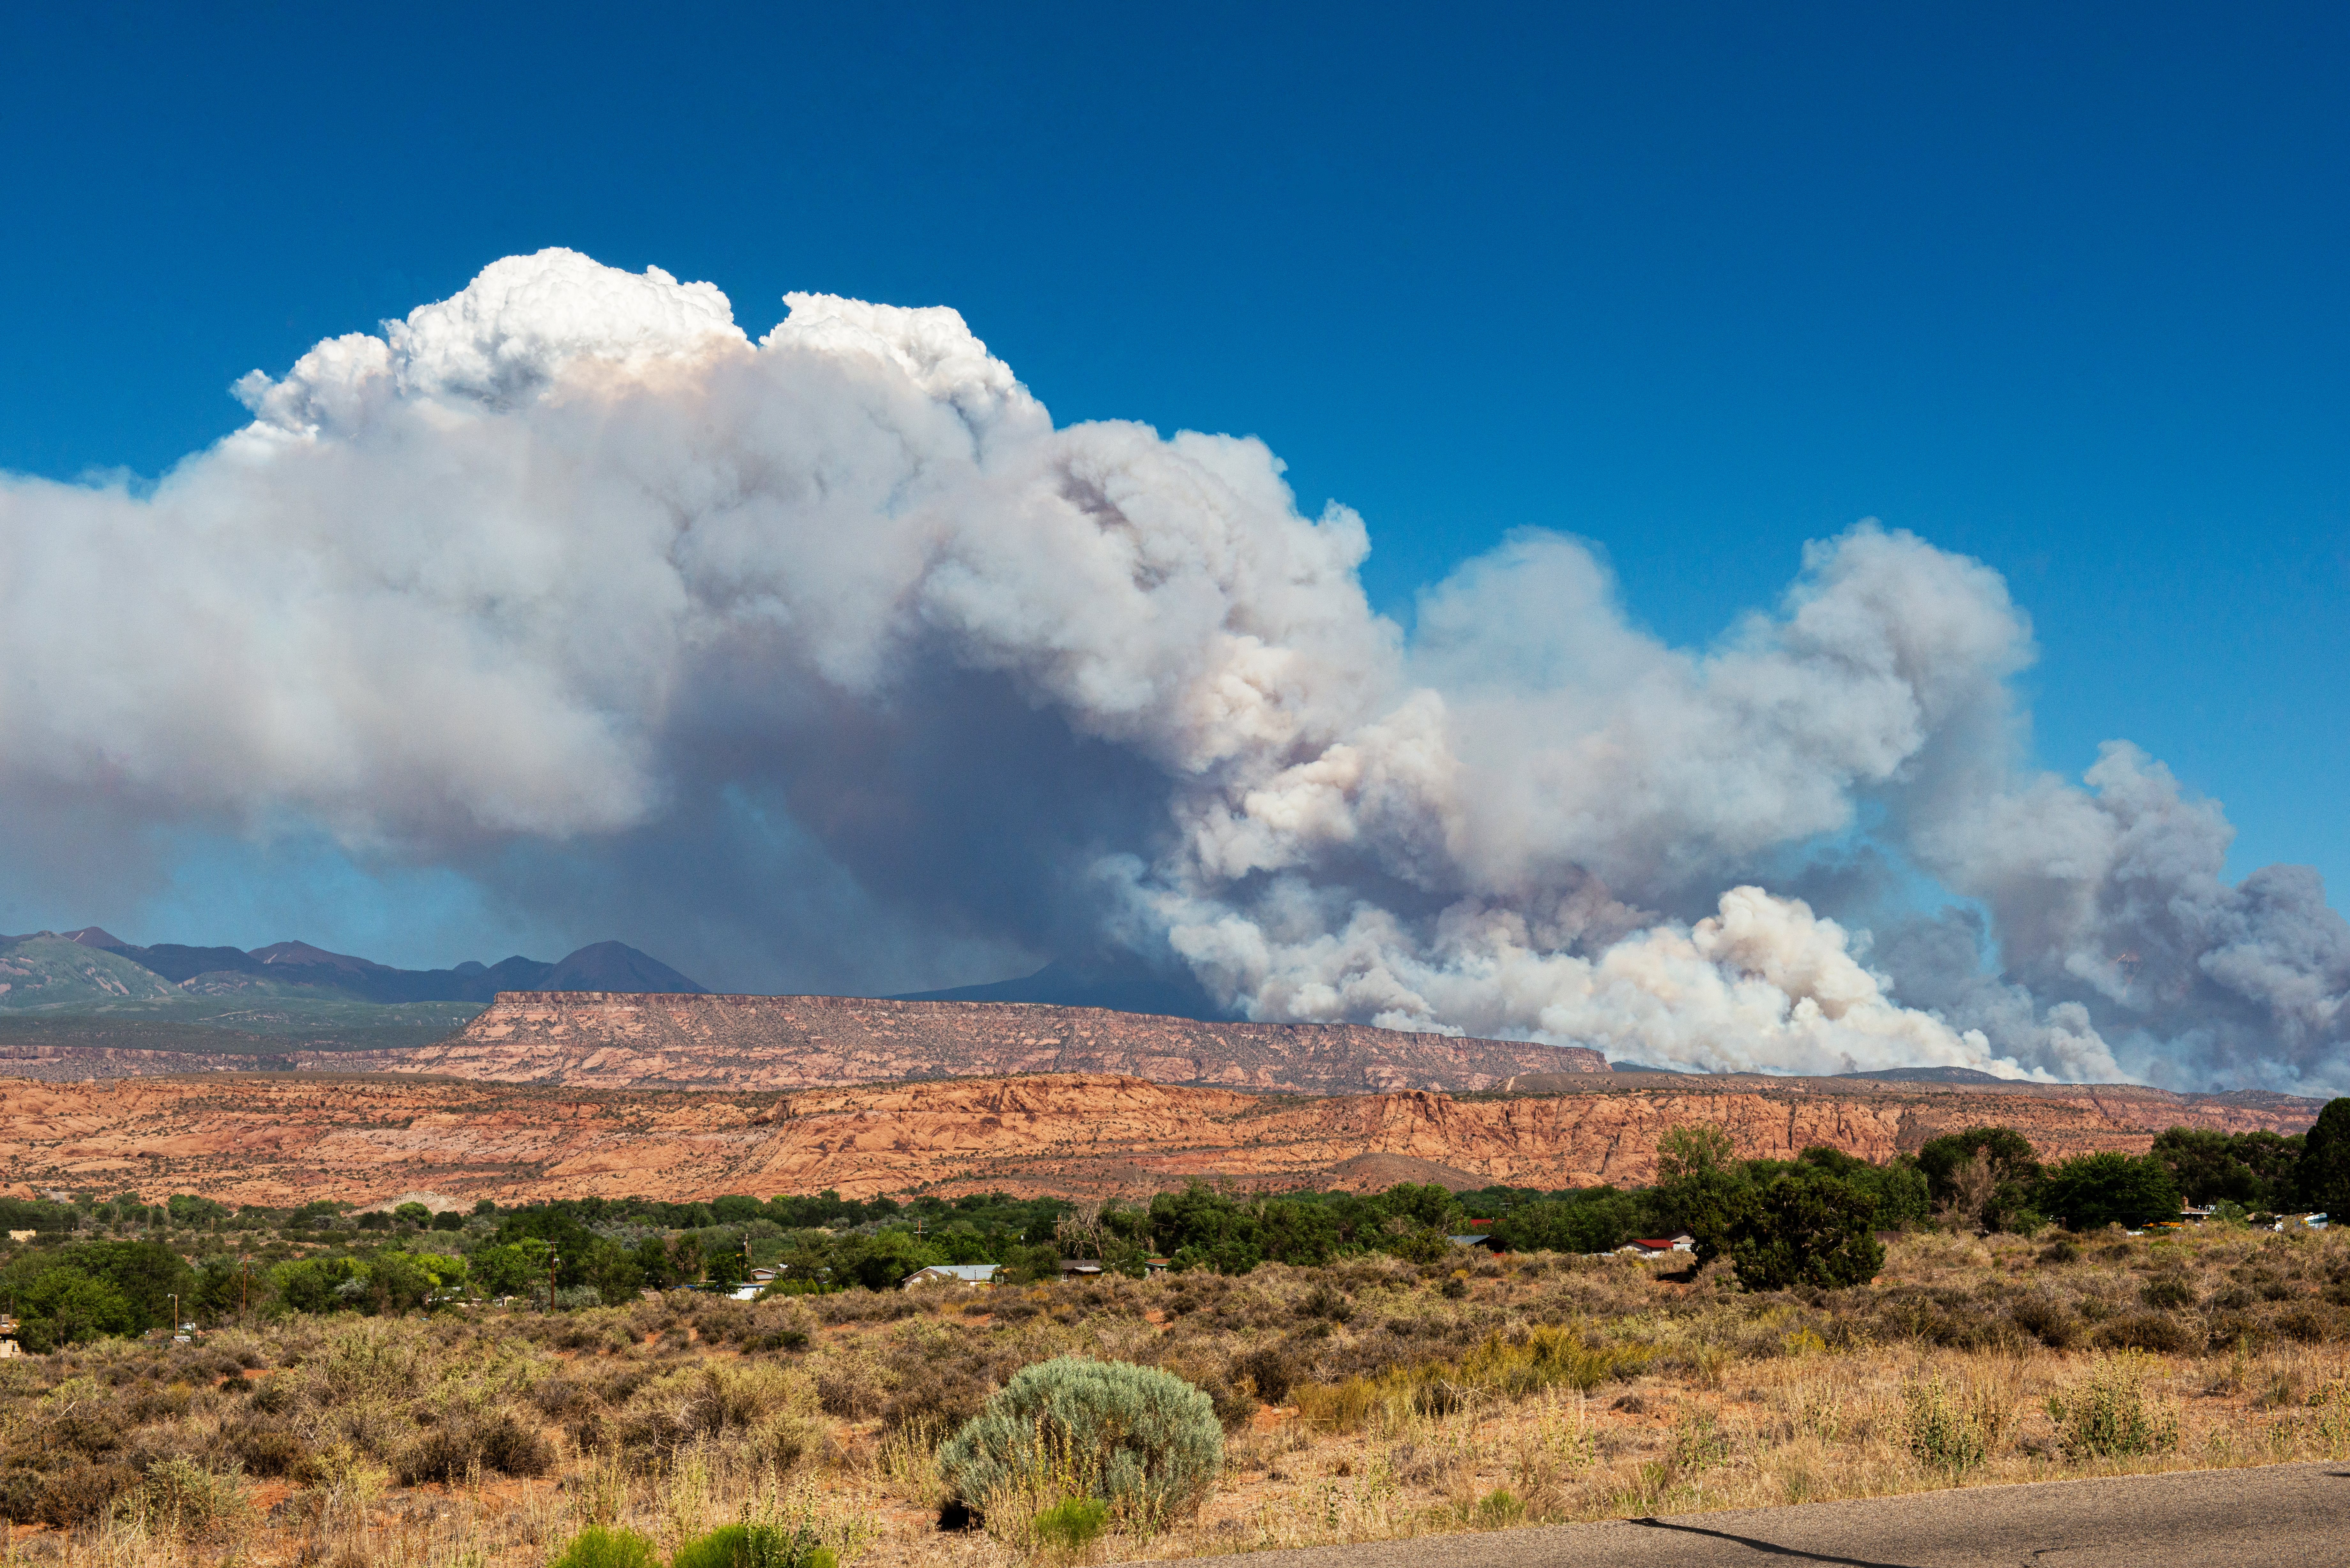 Dark gray and white clouds billow above a fire nestled in between mountains and orange and red sandstone ridges. In the foreground, shrubs and a few houses are visible.